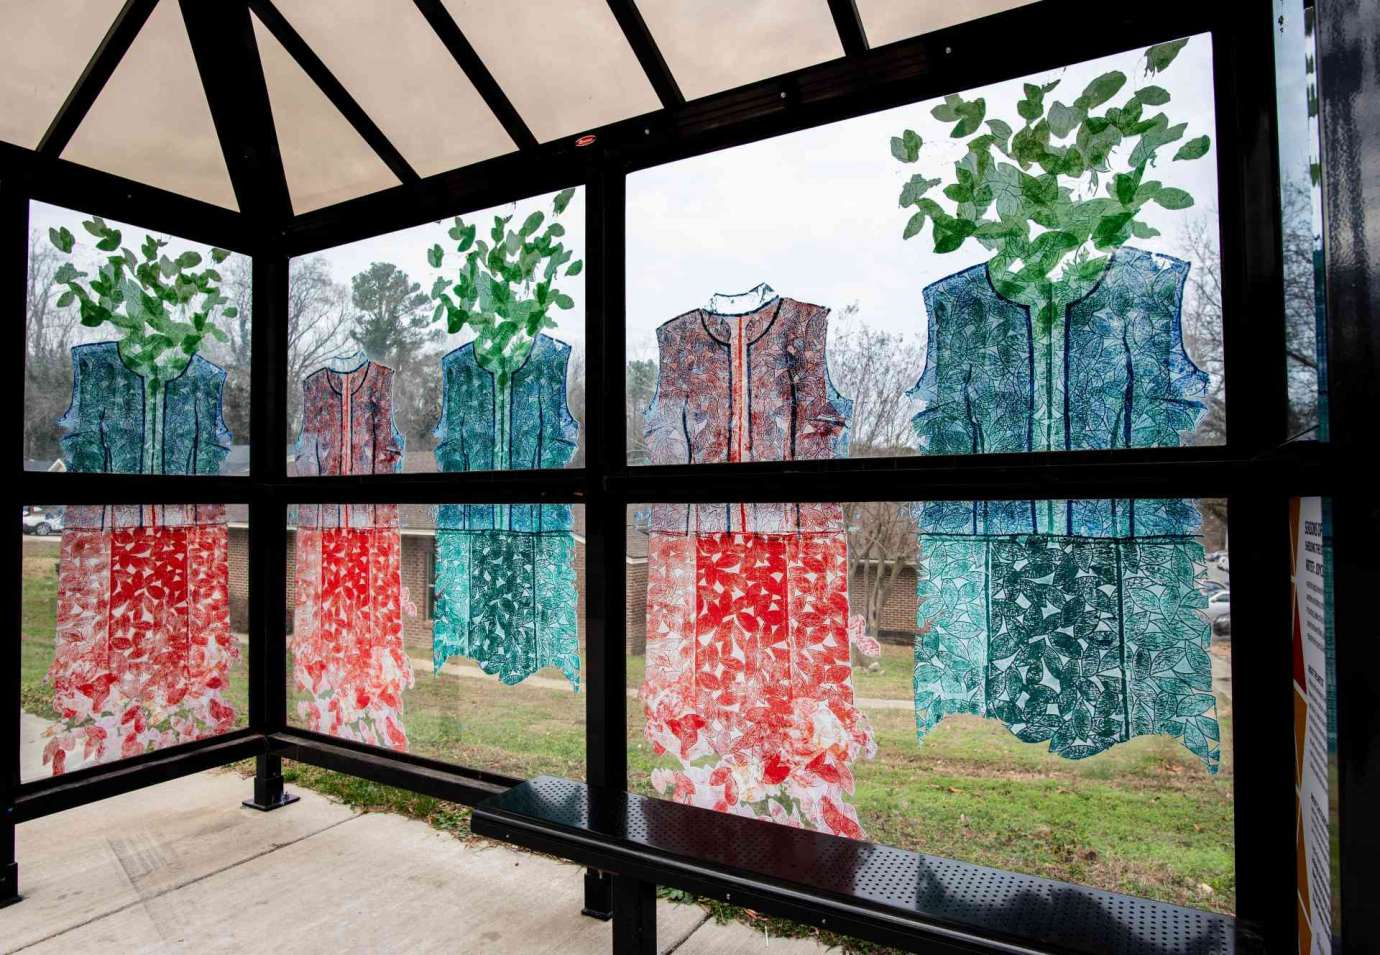 Artwork wrapped on bus shelter windows titled Seasons of Change and Hope: Shredding the Old and Growing the New  by Joyce Watkins King  located at Poole Road at Rawls Drive